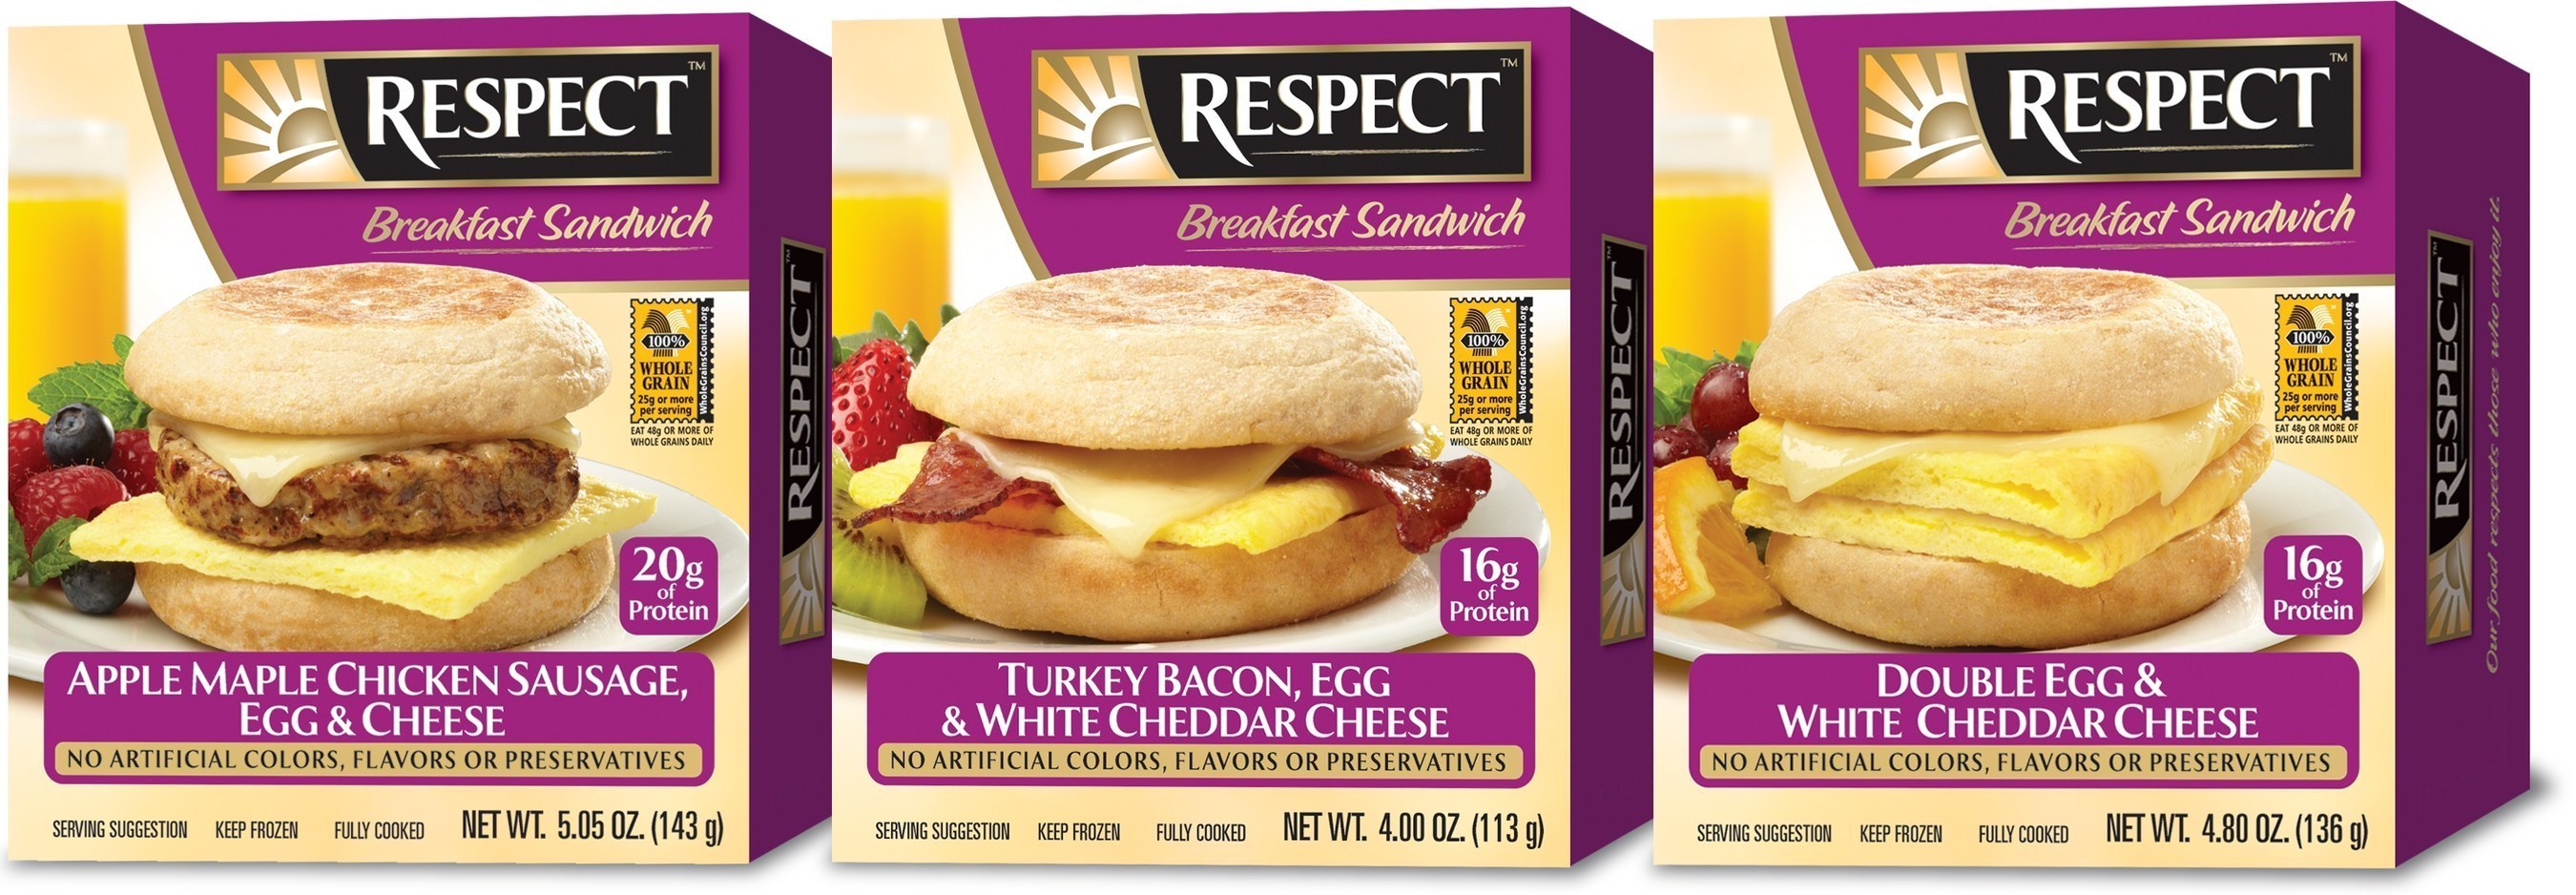 Respect Foods, Inc. introduces RESPECT(TM) Frozen Breakfast Sandwiches!  Three delicious varieties are available for immediate distribution throughout the United States in single serve cartons.